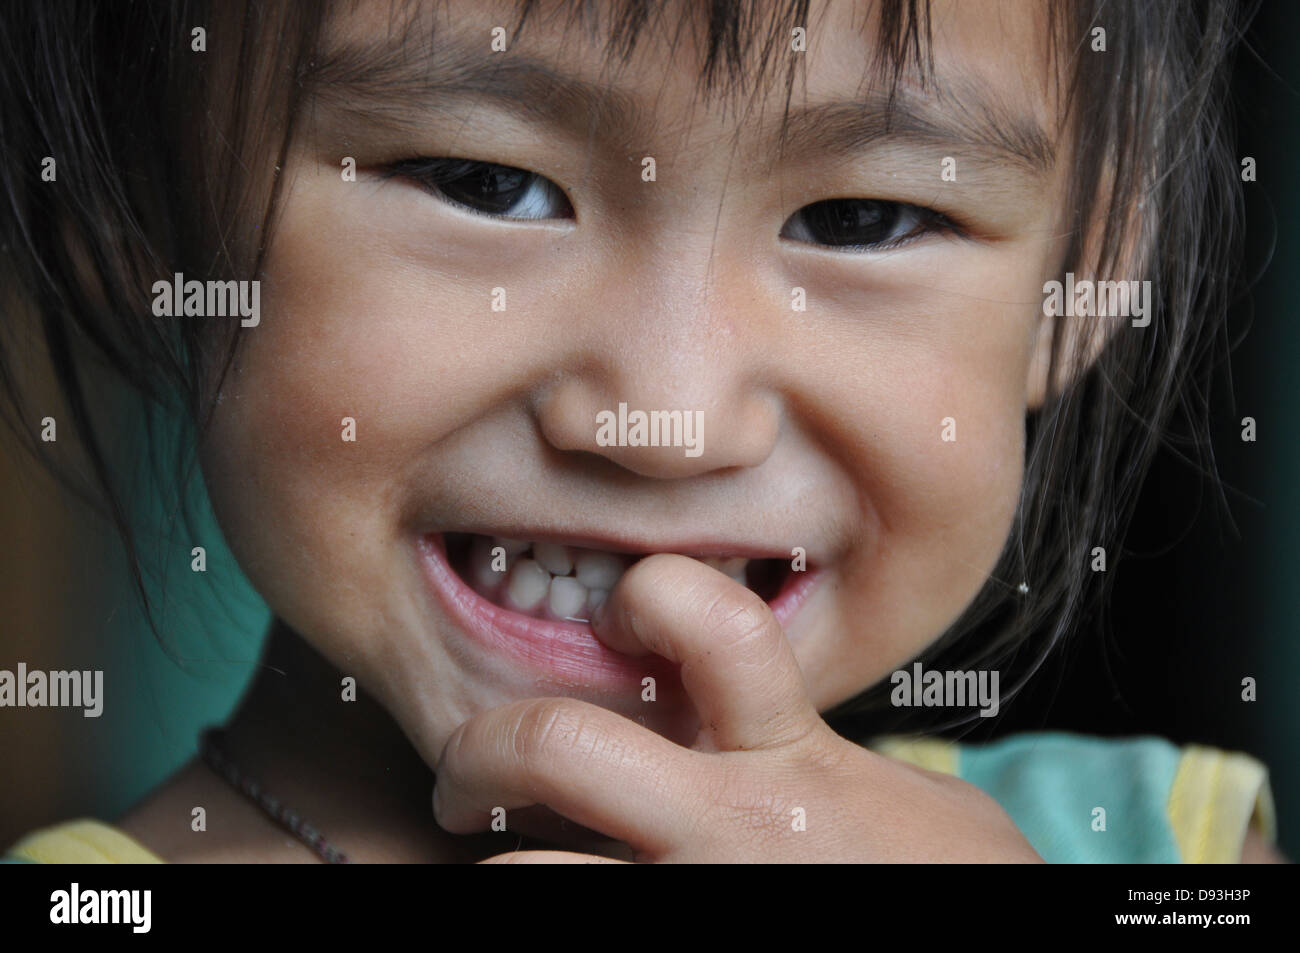 Darjeeling, West Bengal, India Portrait of a young child Stock Photo